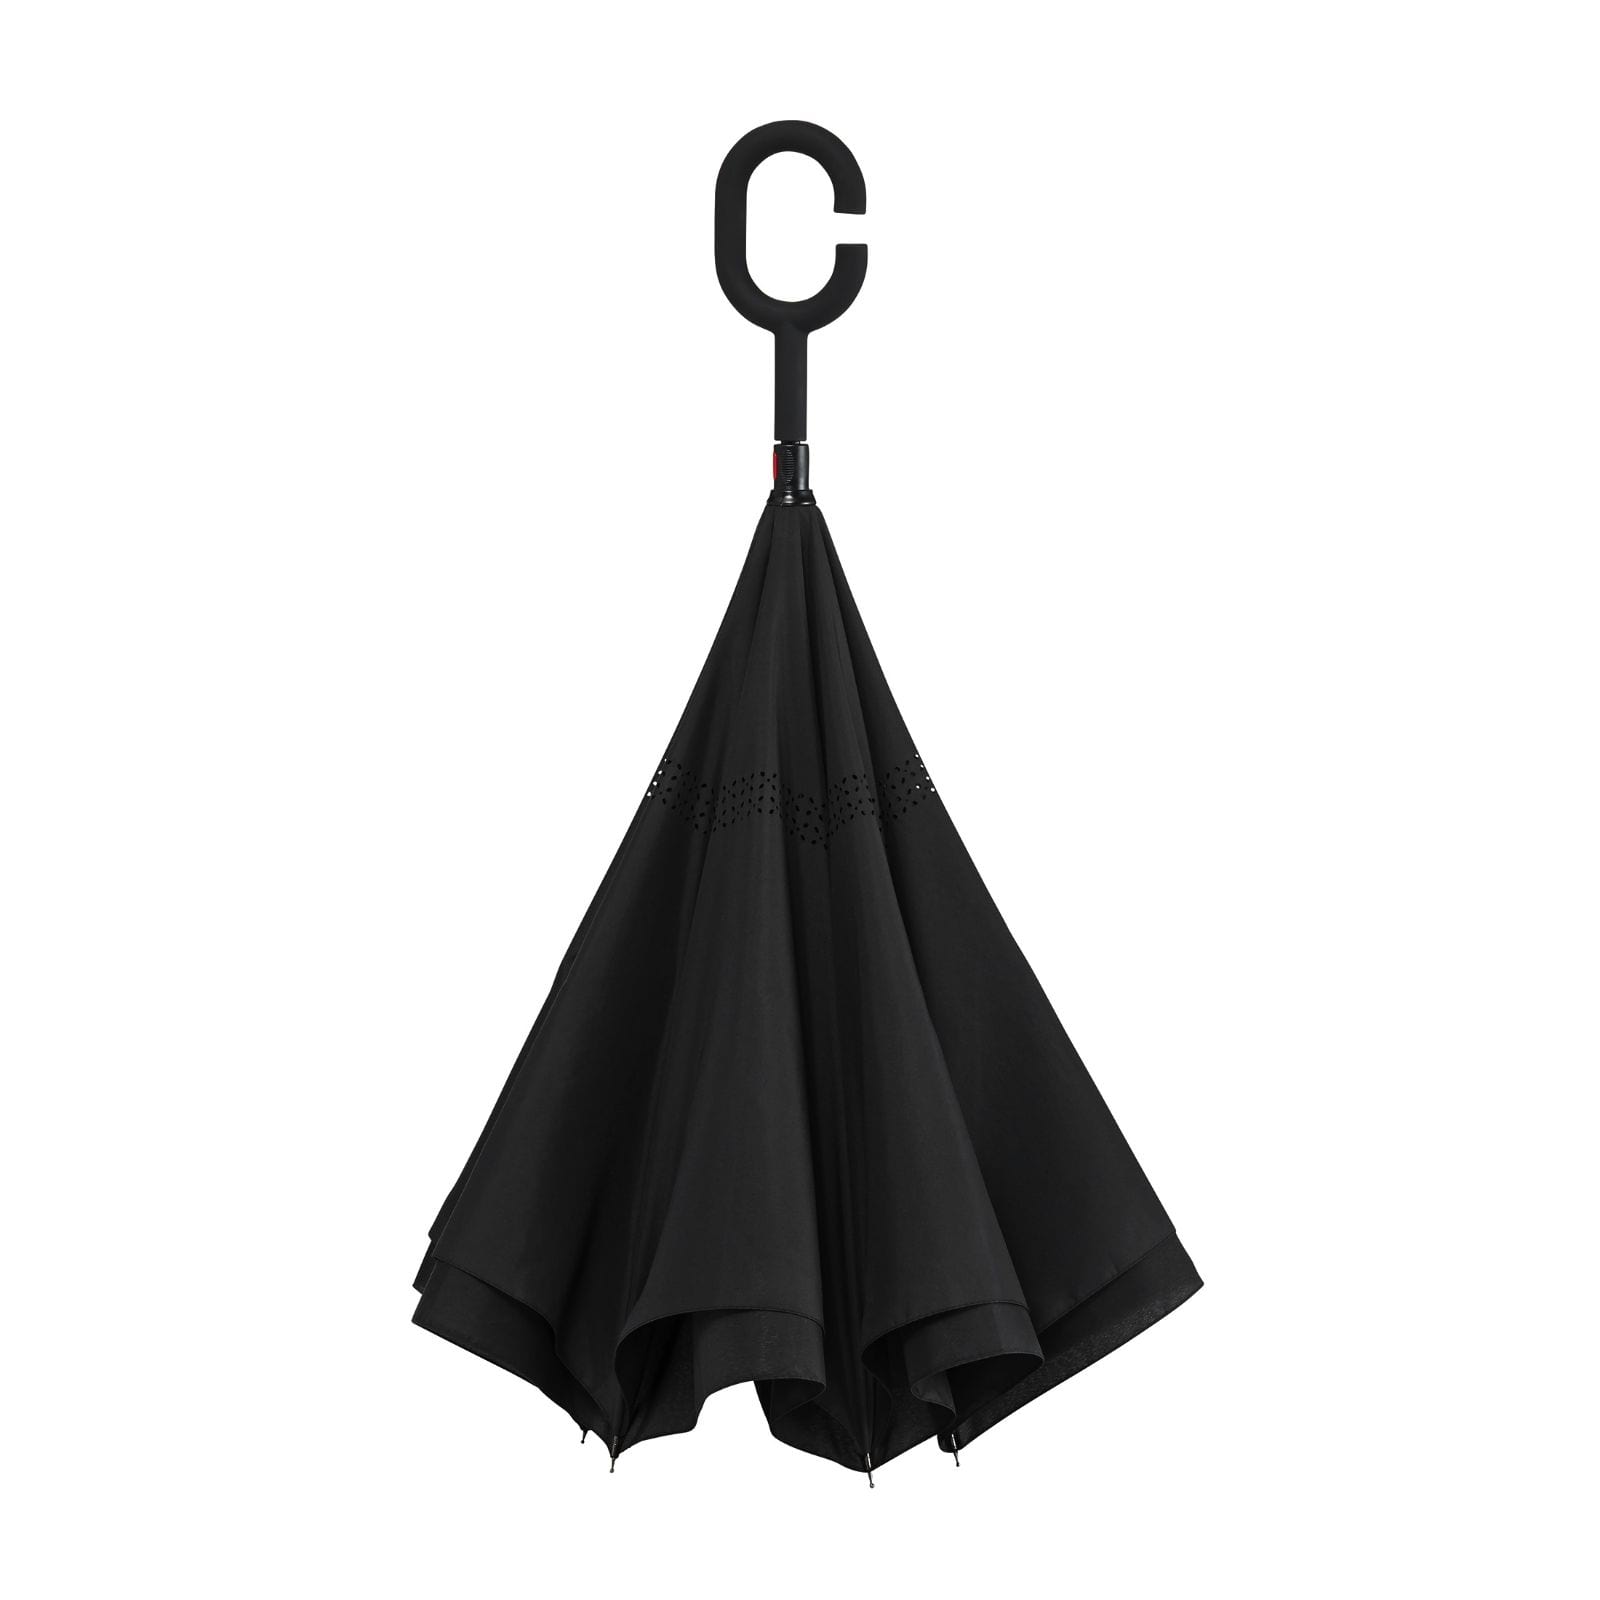 Inside Out Umbrella Double Layer Windproof (Black) - Impliva.